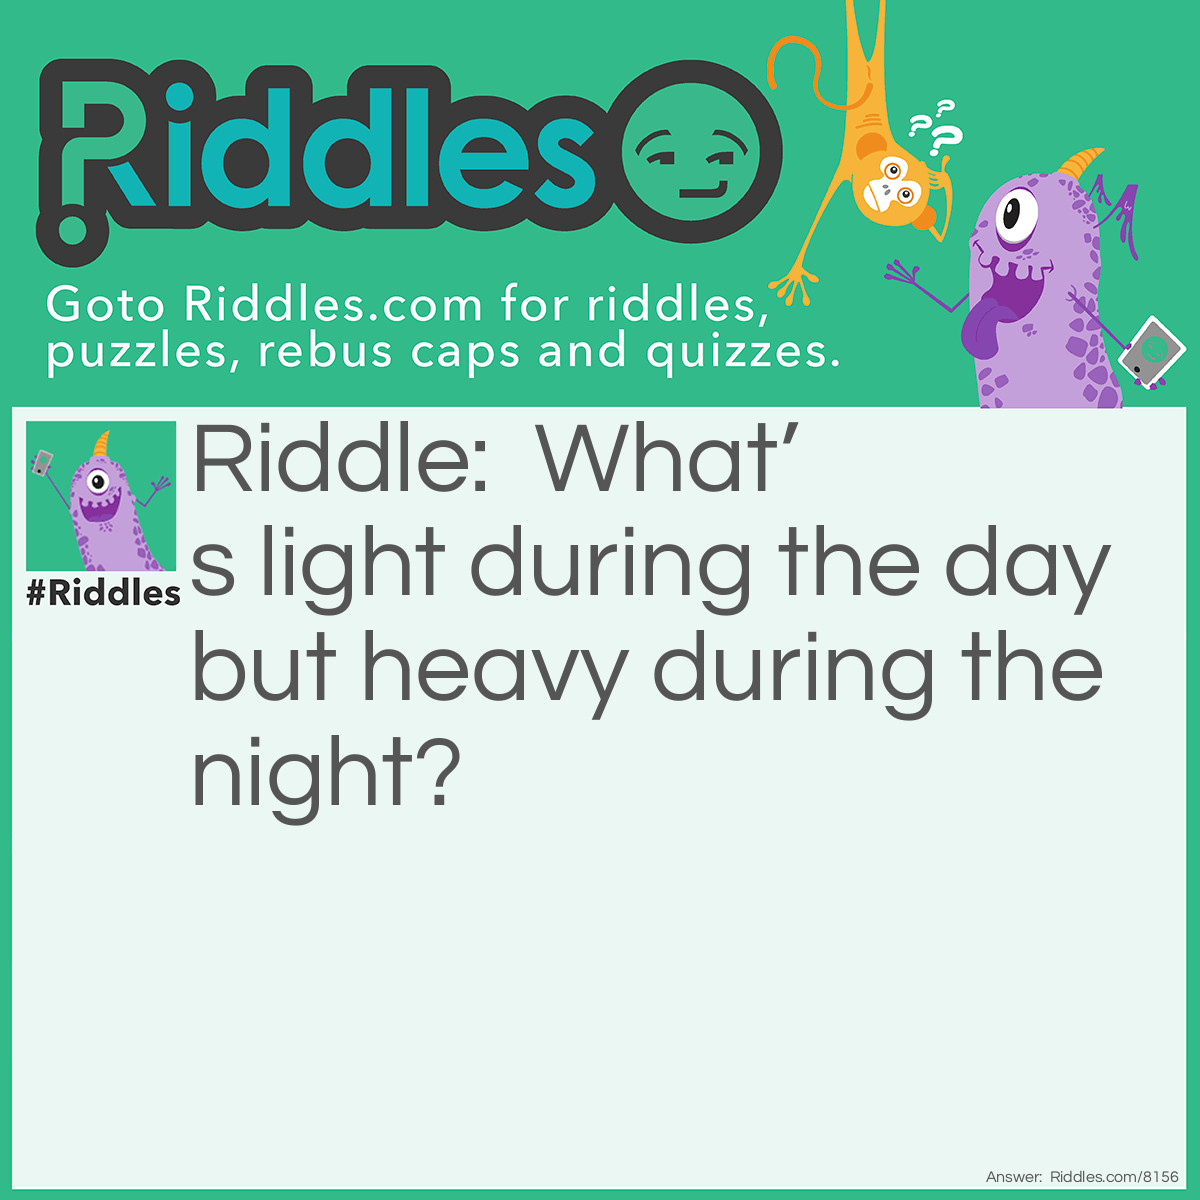 Riddle: What's light during the day but heavy during the night? Answer: Eyelids.